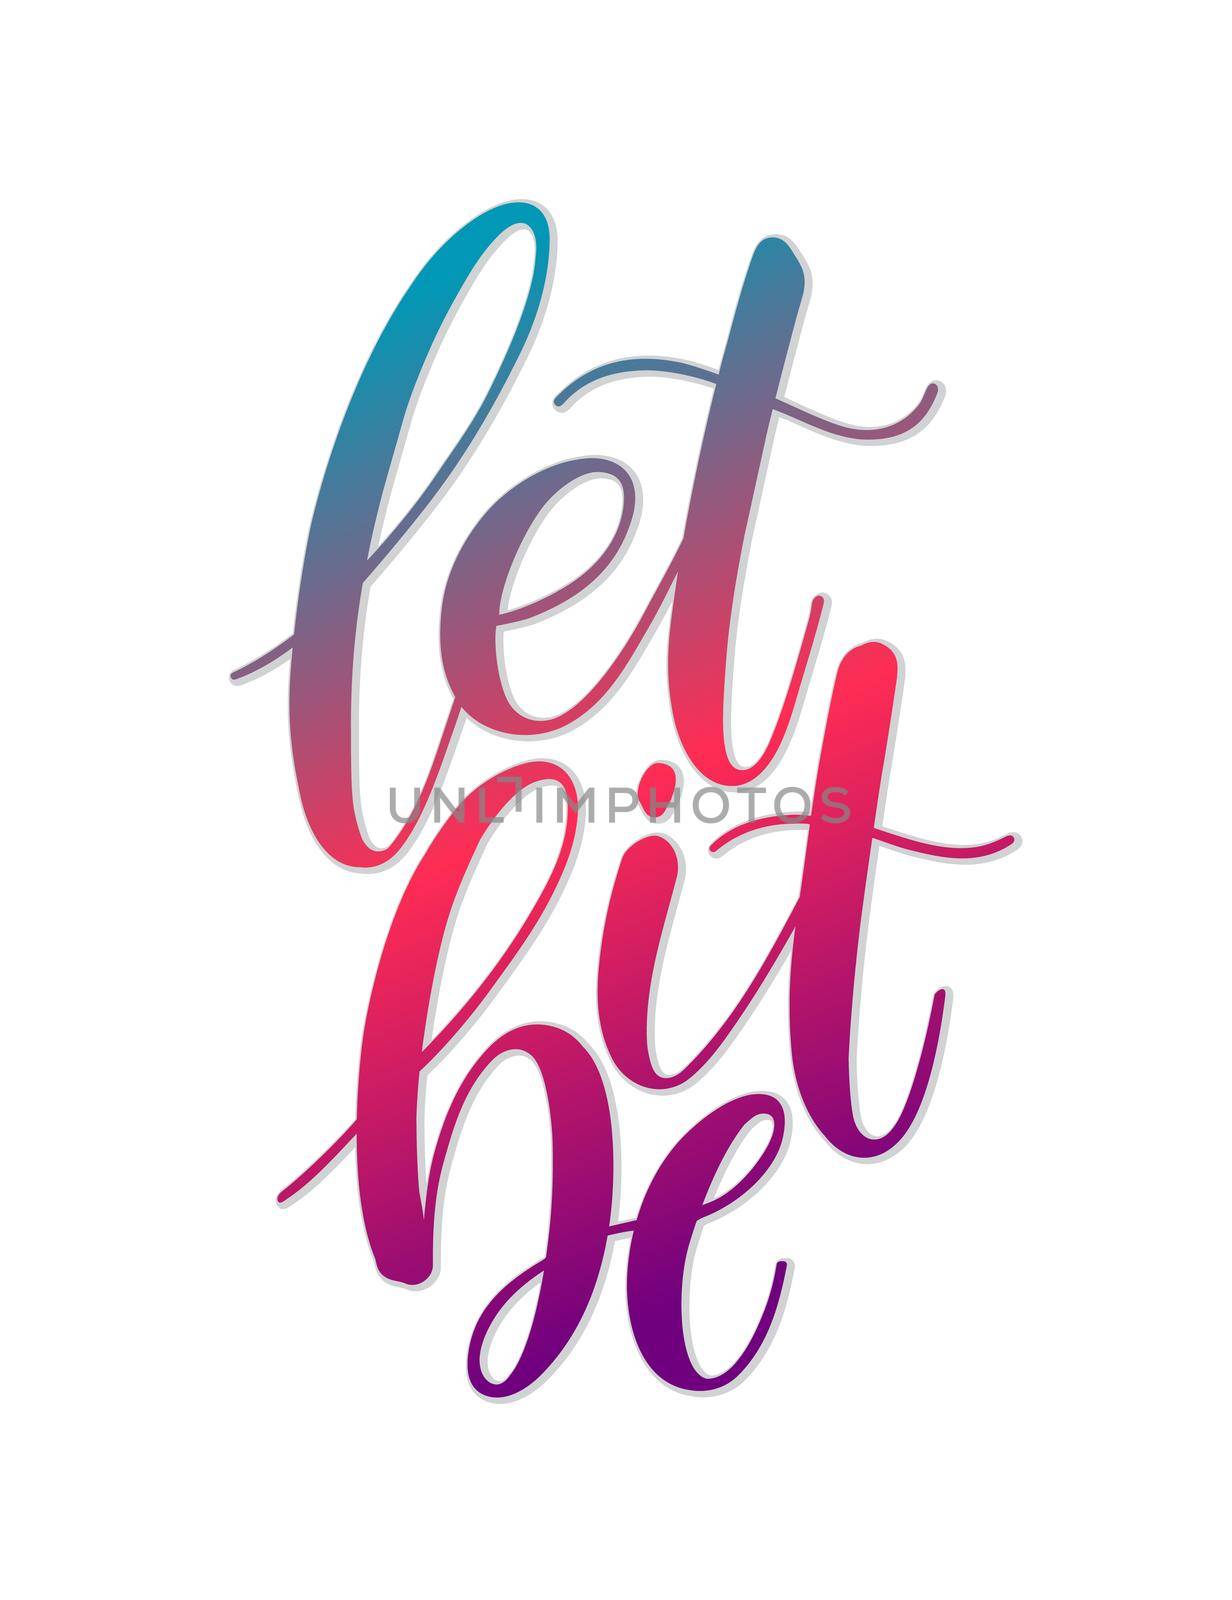 let it be calligraphy. Hand-drawn illustration